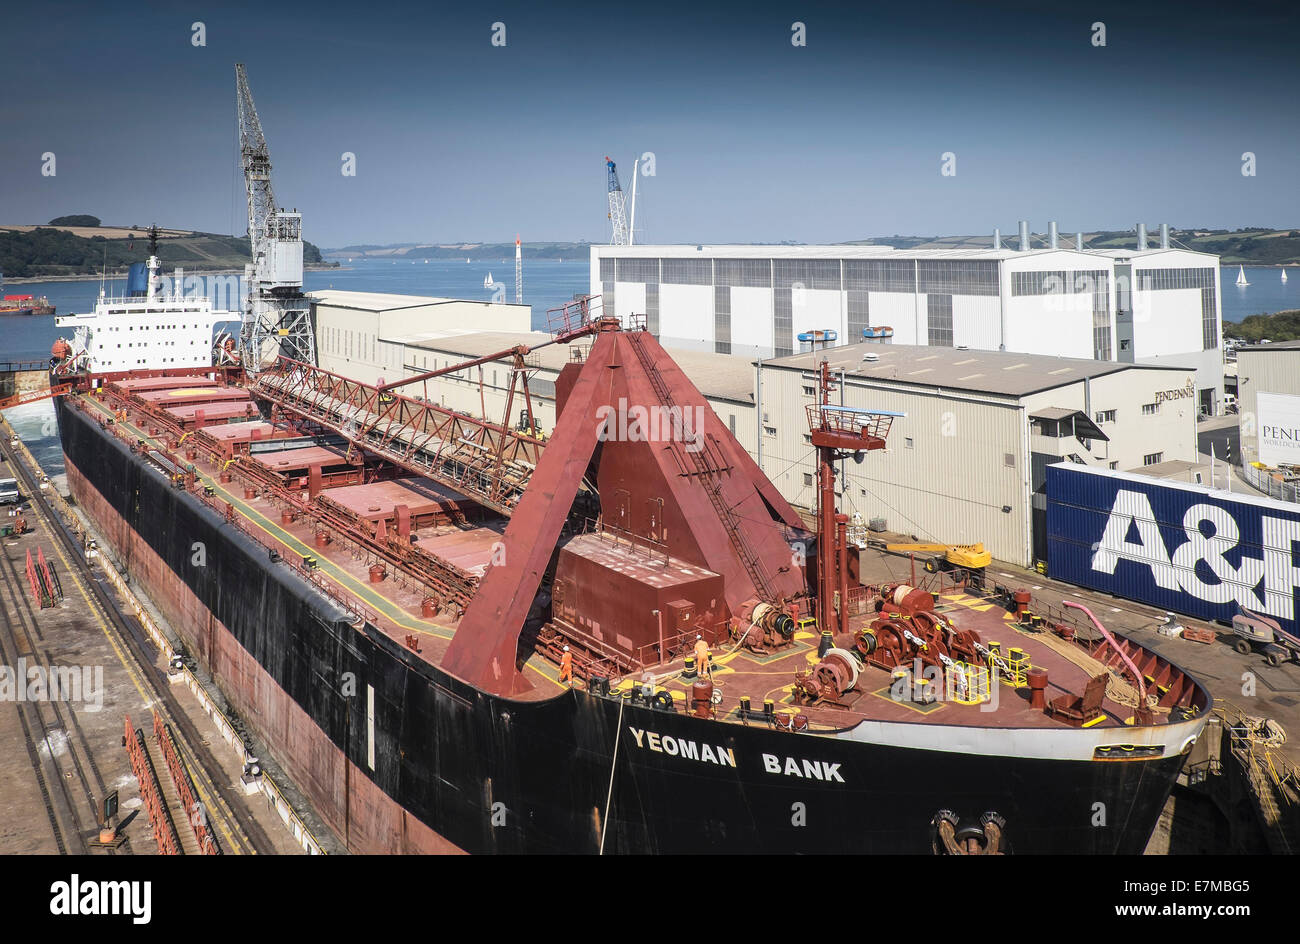 The Yeoman Bank, a self-discharging bulk carrier in the Falmouth No.2 dry dock. Stock Photo